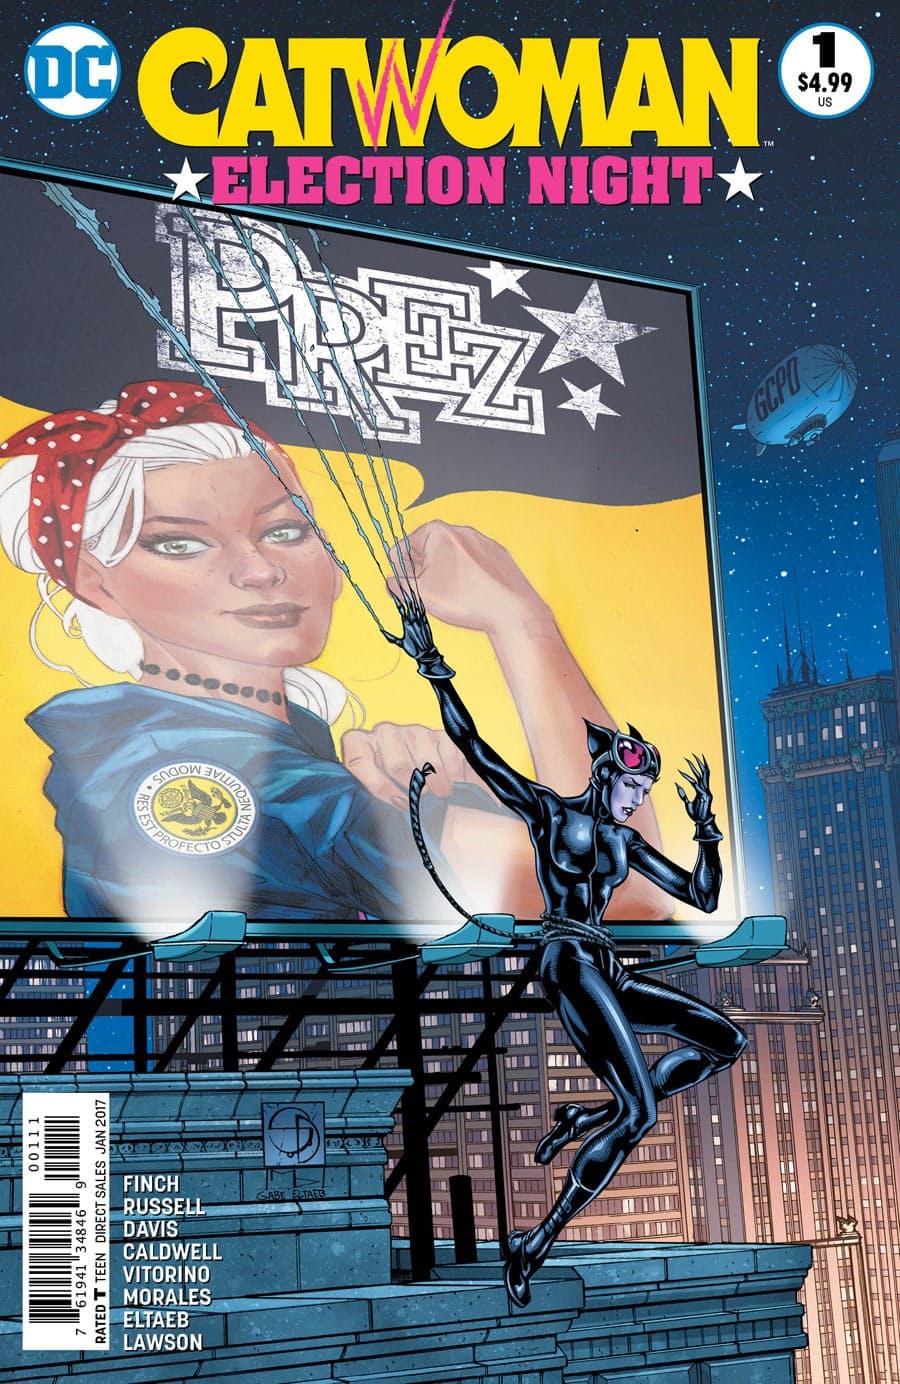 Catwoman: Election Night Vol. 1 #1